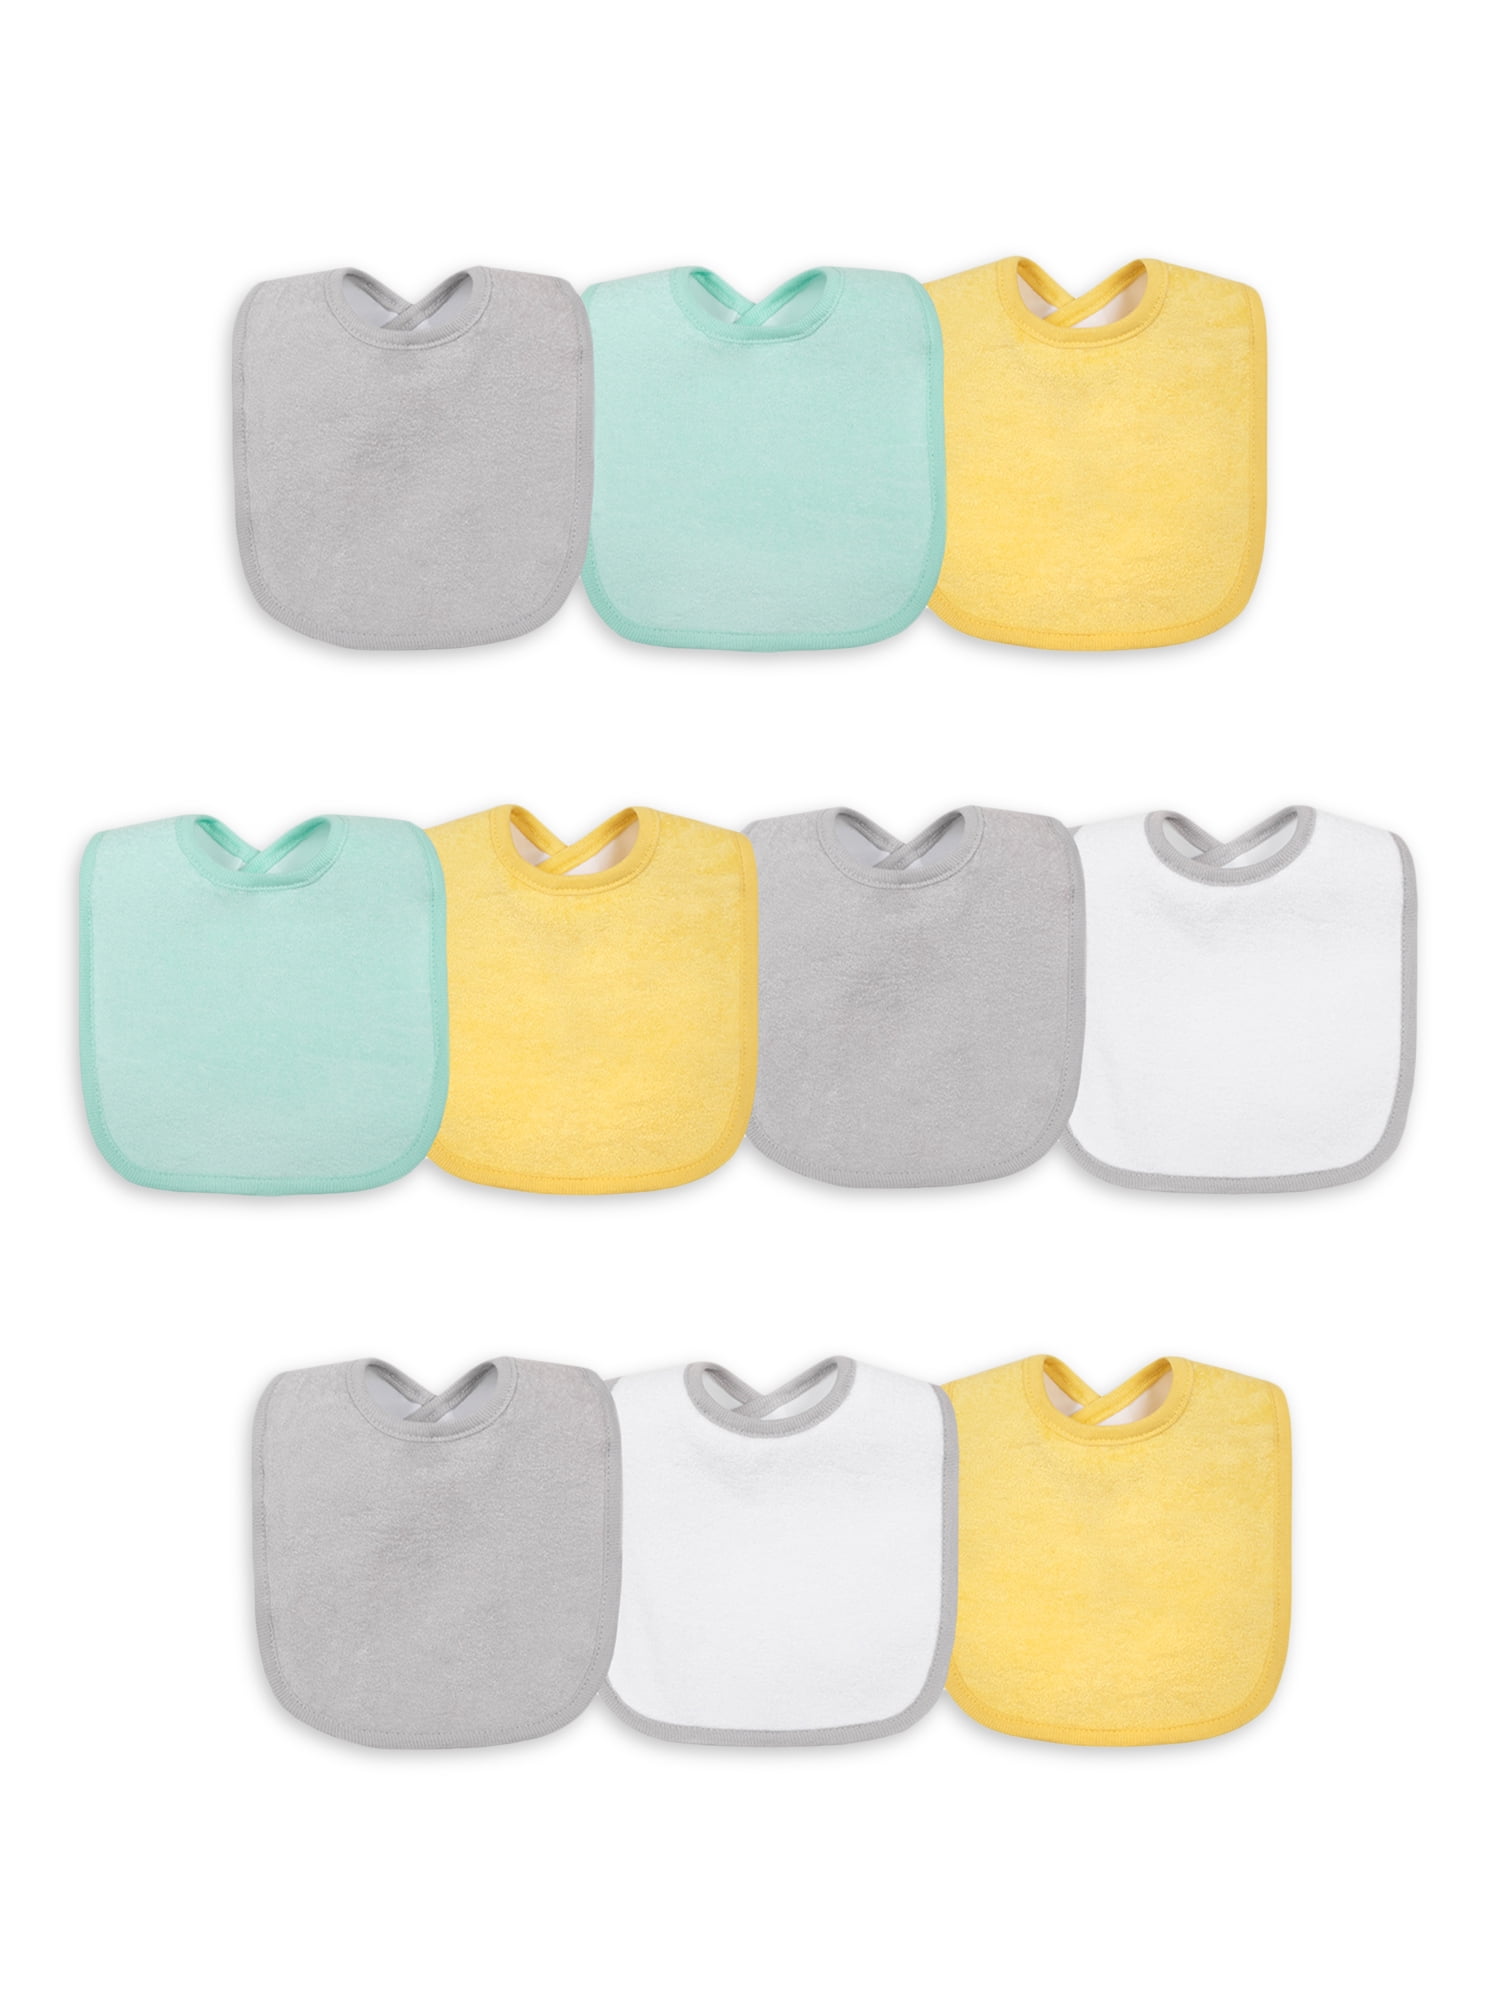 13x12 Inch Bestgift Unisex Baby Cotton Solid Color Snap Drool Bibs One Size White